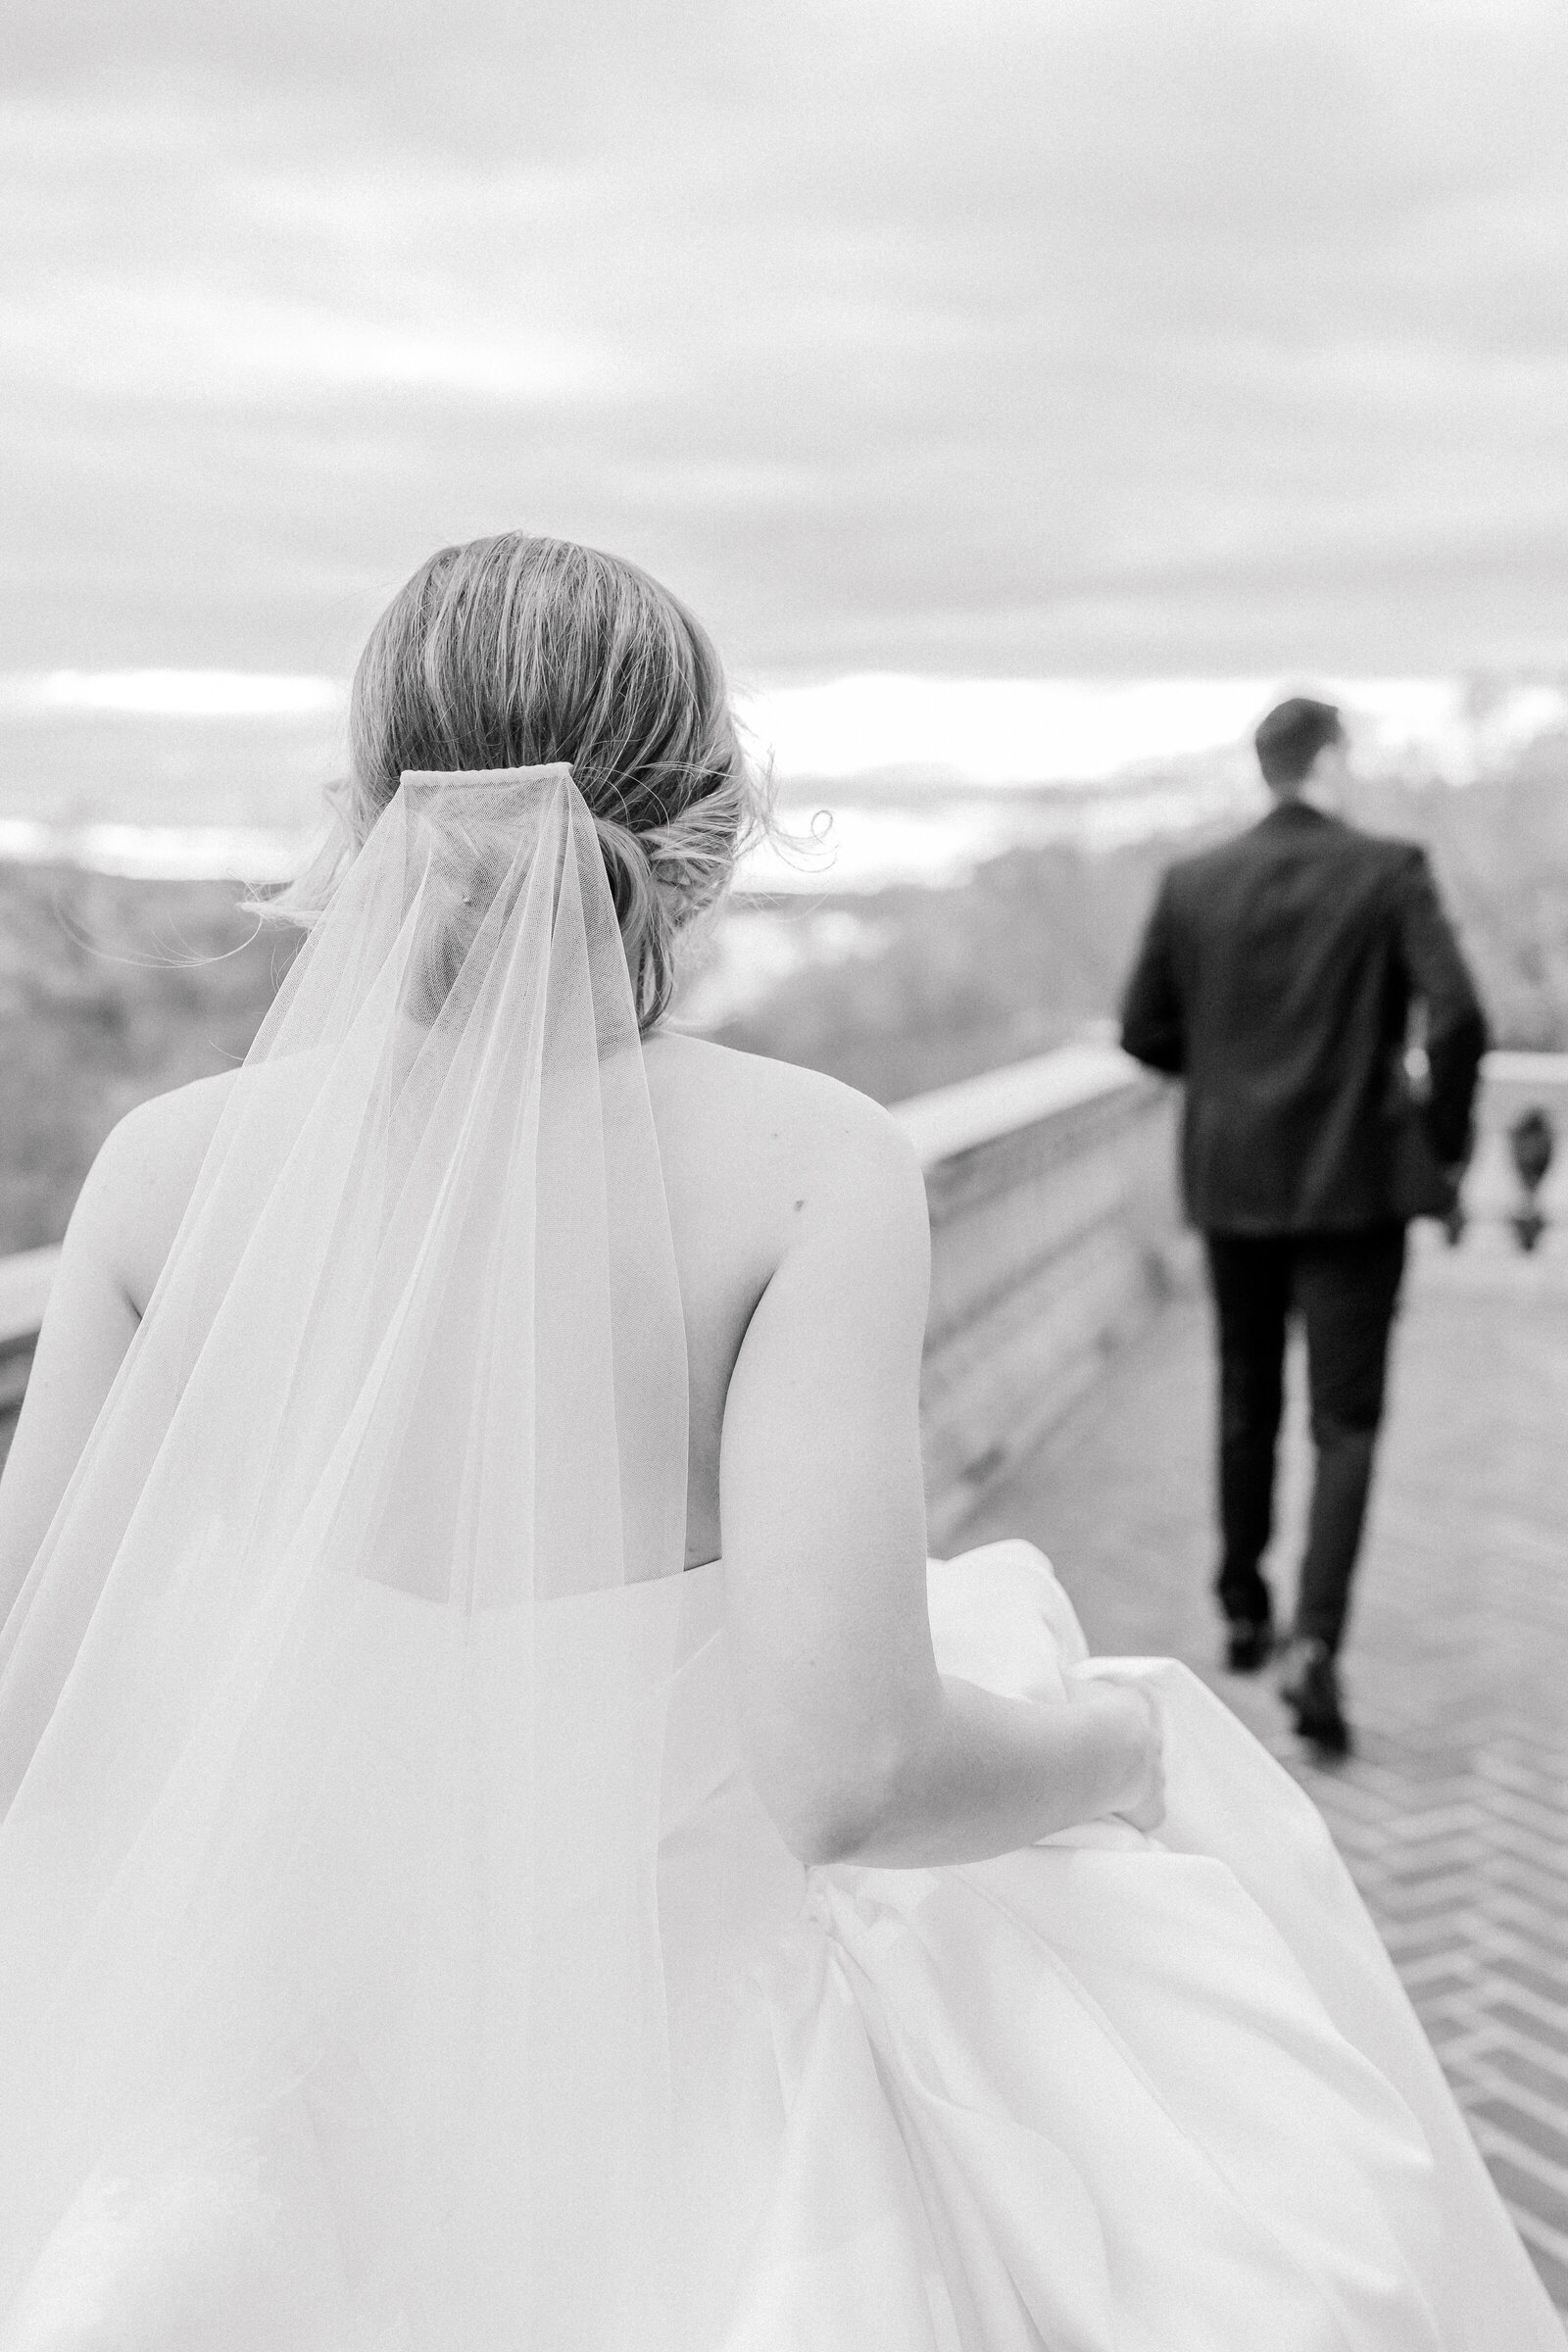 Candid, black and white, of the bride following the groom down a brick walkway